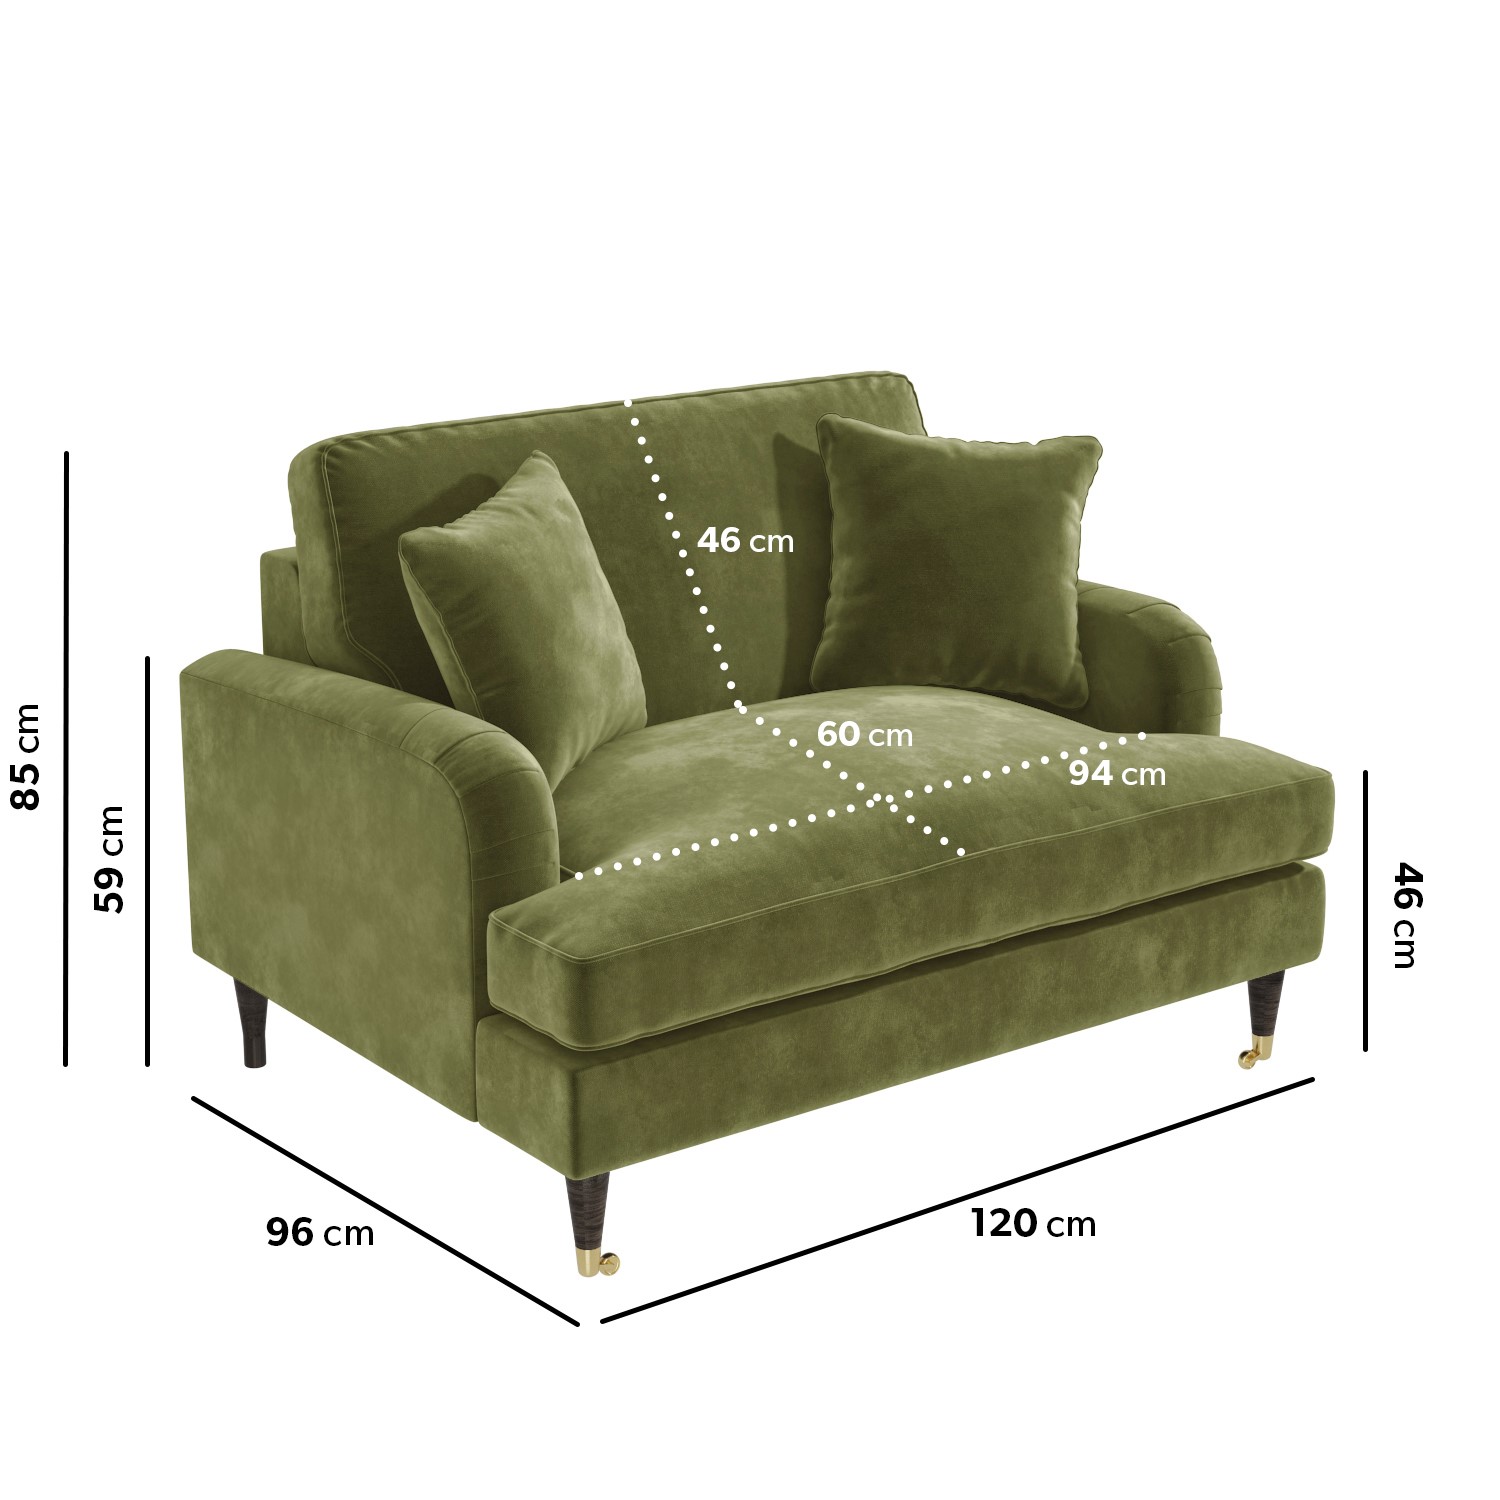 Read more about Olive green velvet loveseat and footstool payton